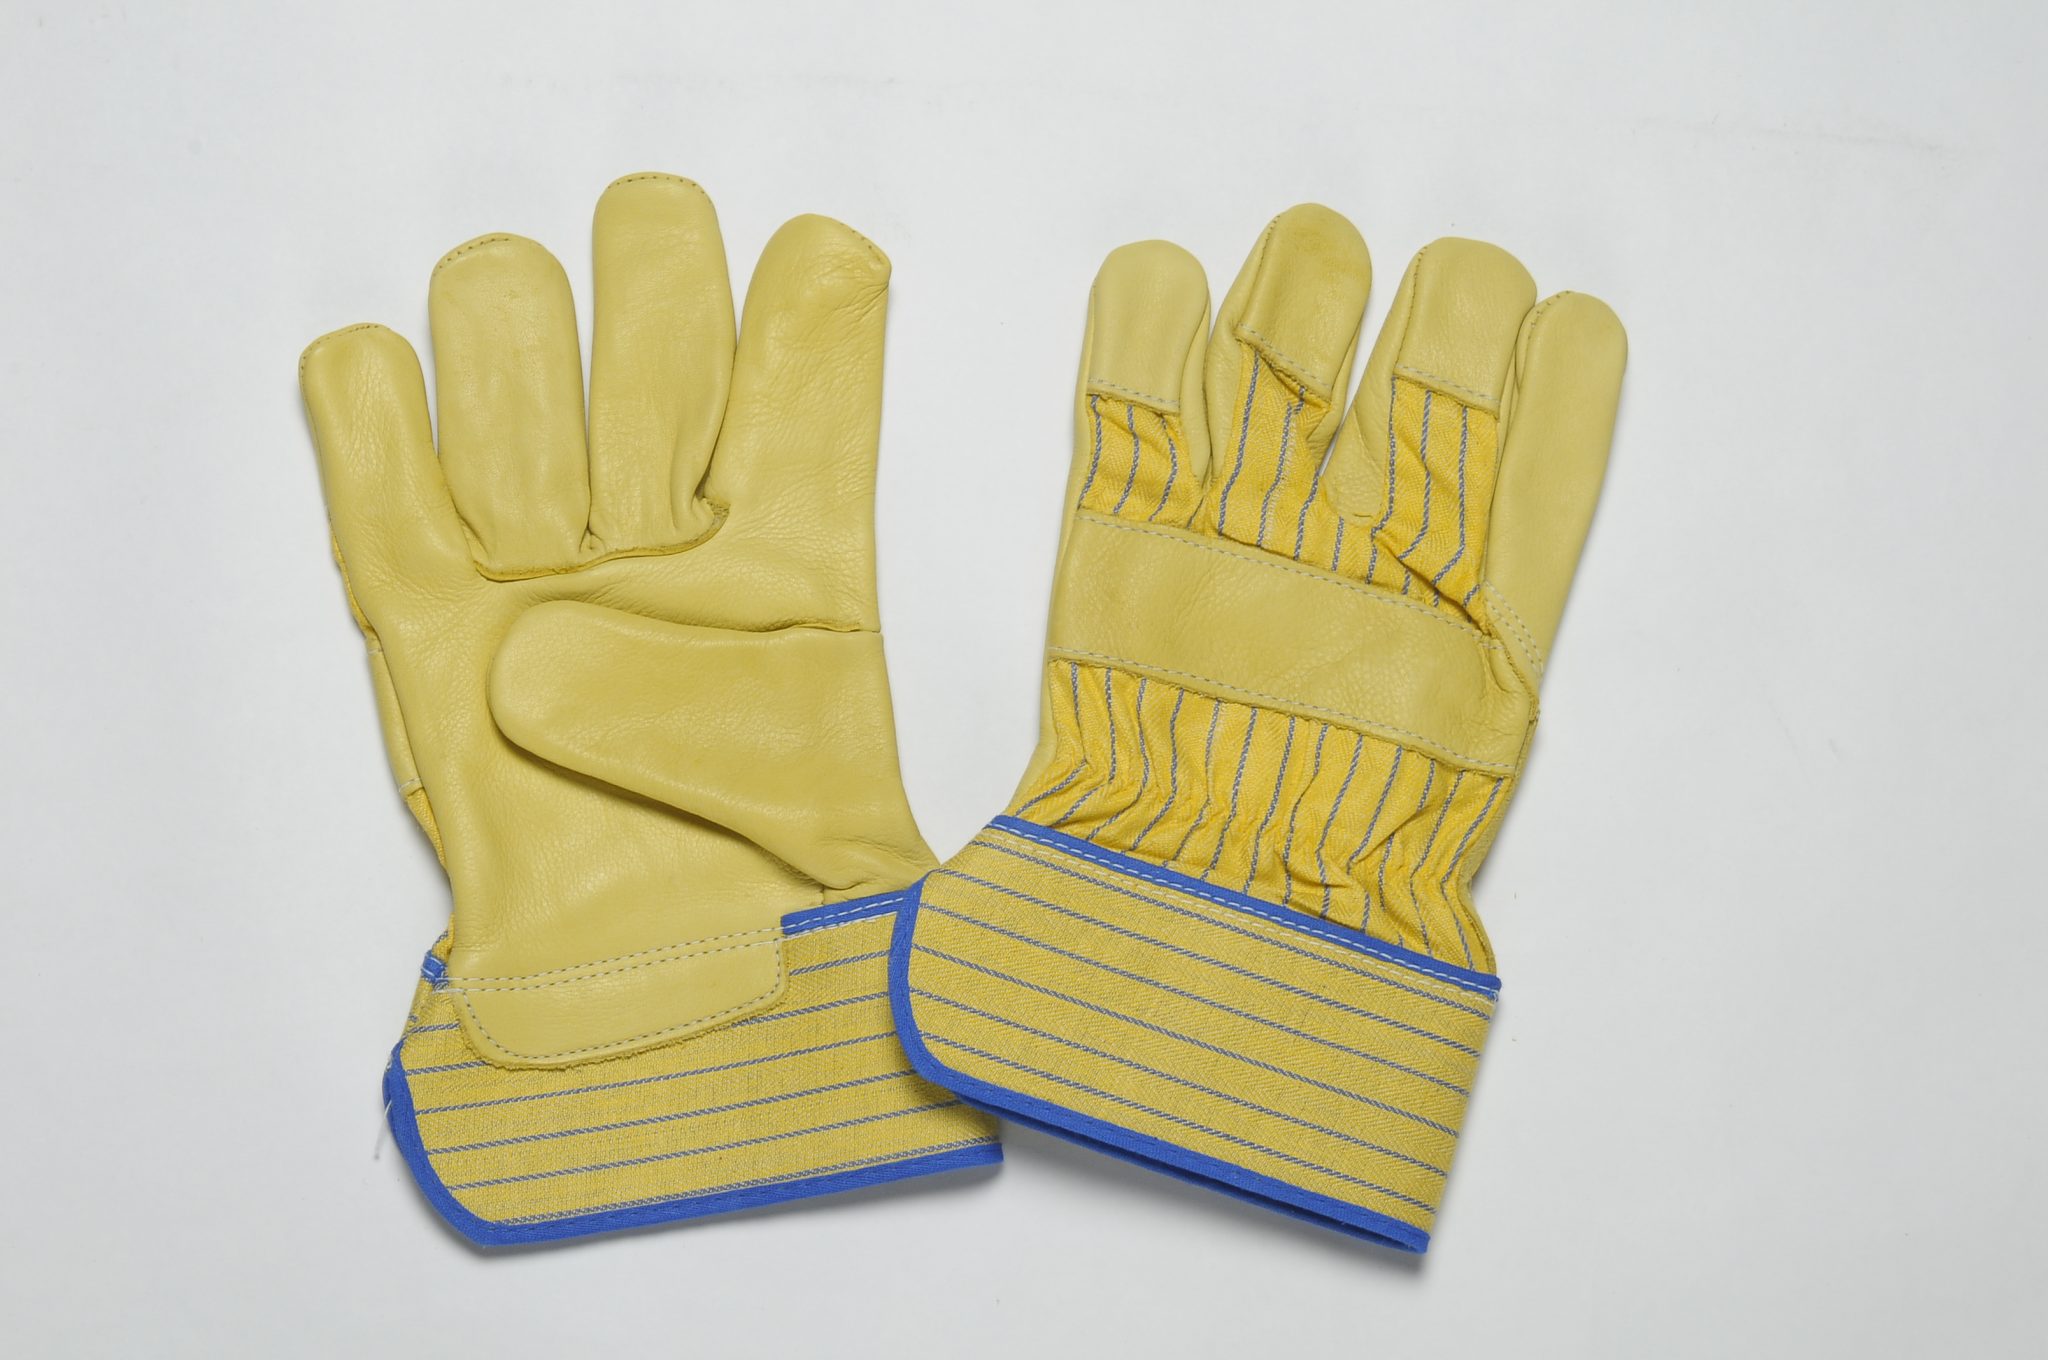 YELLOW GRAIN GLOVES. FLANNEL LINER IN THE PALM. YELLOW BLUE CUFF & BACK. ADJUSTIBLE ELASTIC IN THE WRIST